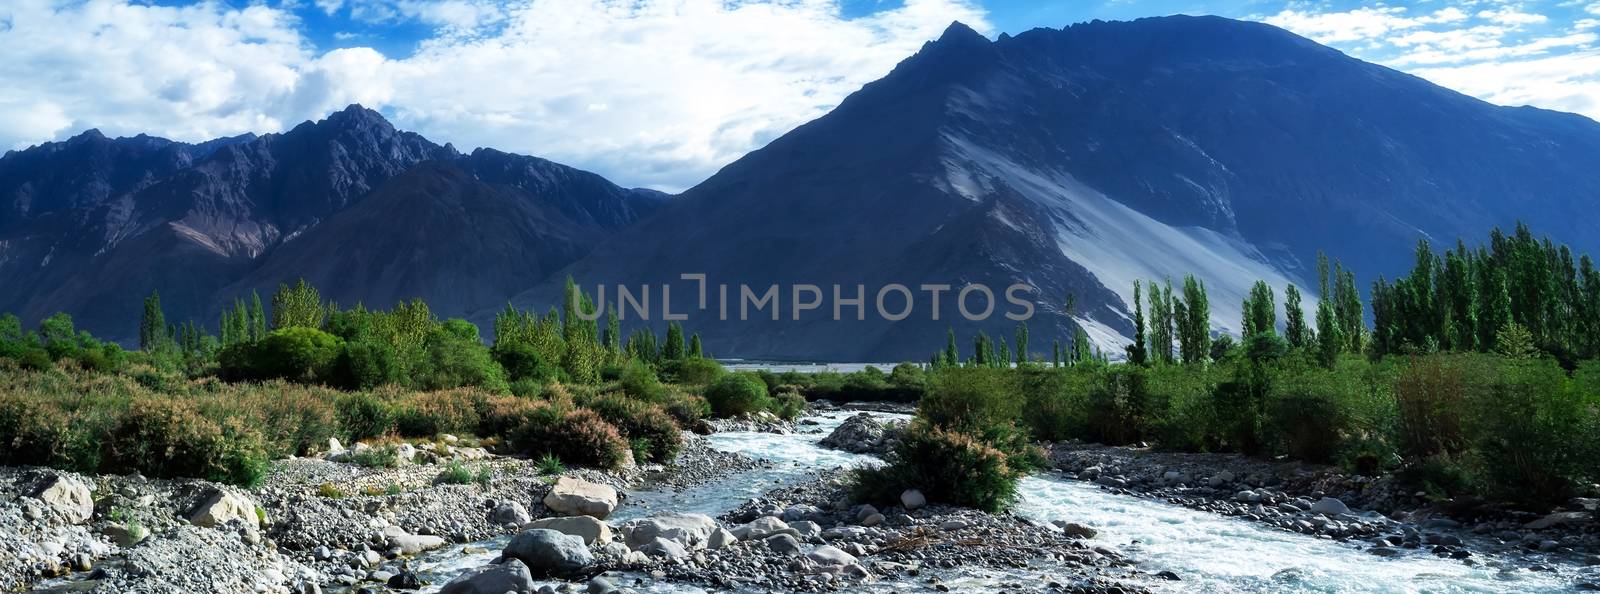 Natural landscape in Nubra valley by thisisdraft